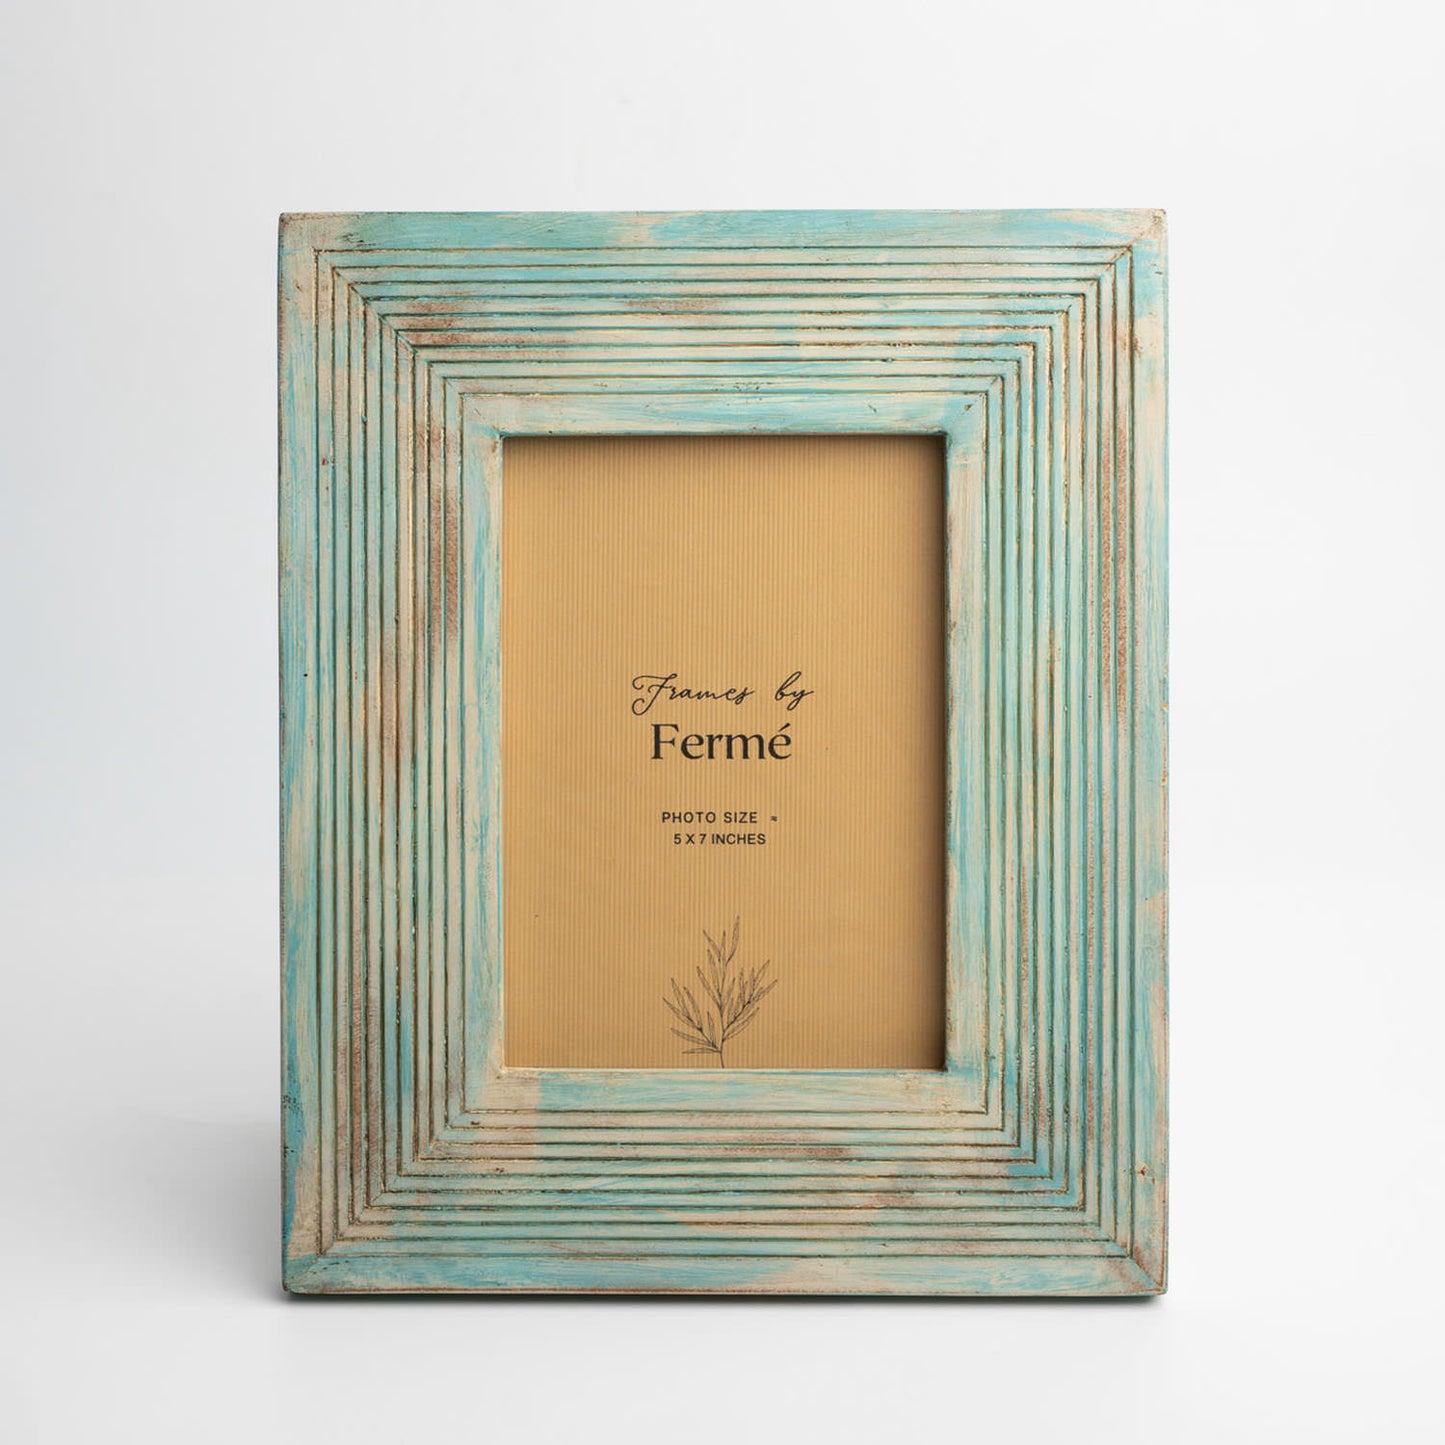 Ferme Vintage Rustic Wooden Hand Carved Photo Frame Turquoise Blue FPF153 - 5x7 inches